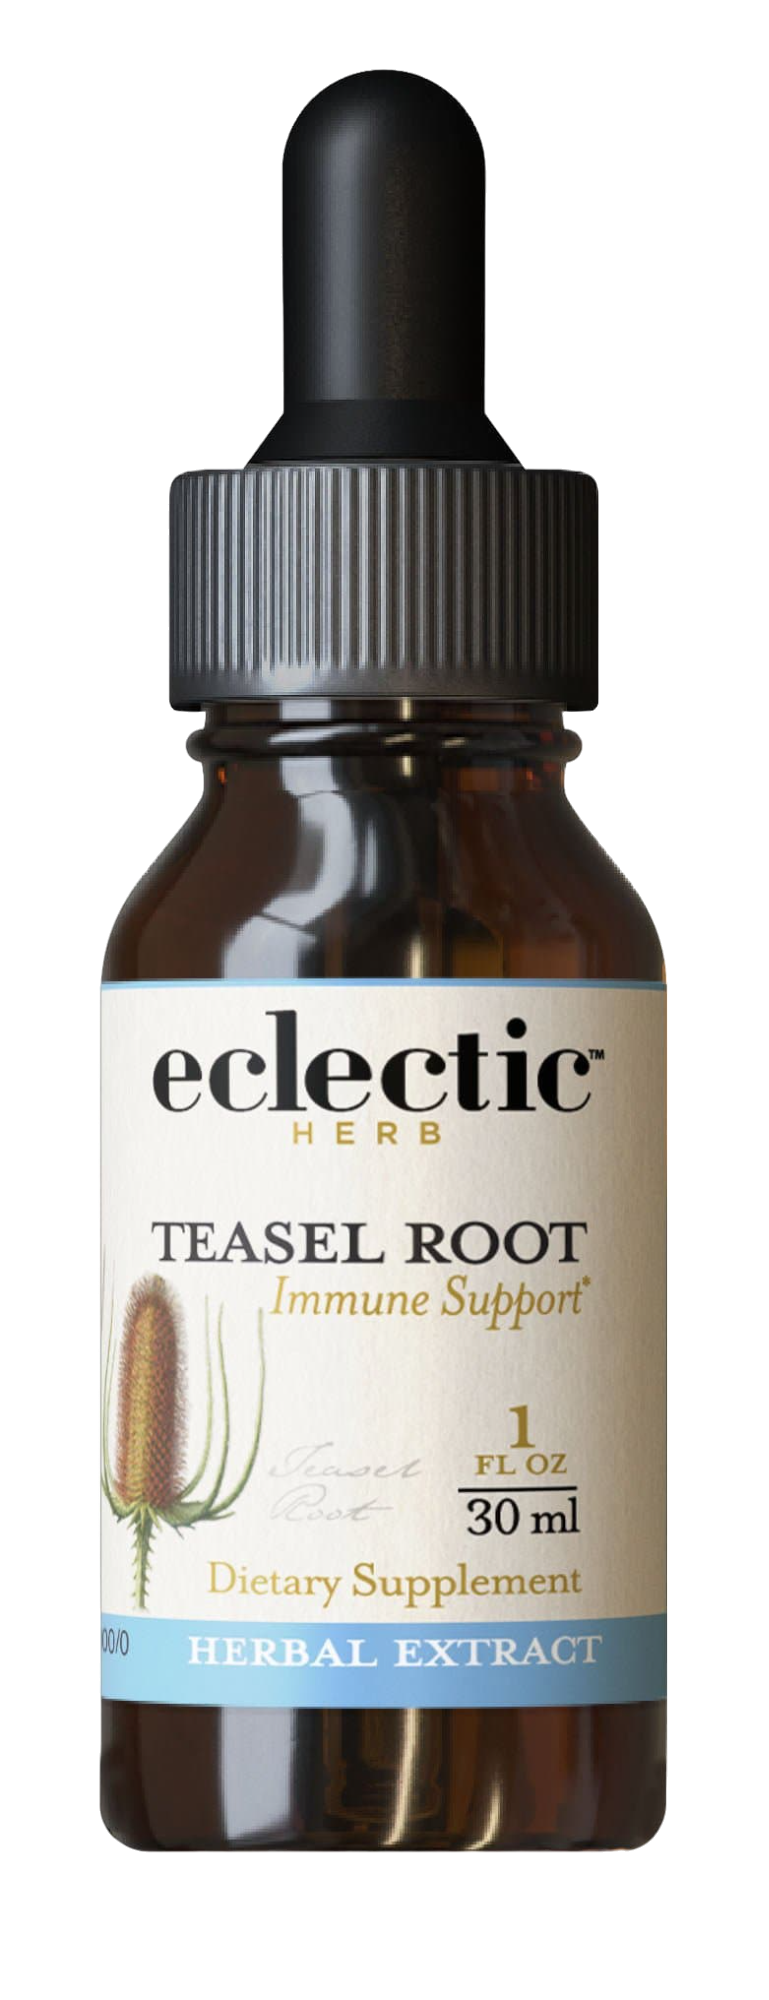 Teasel Root Extract